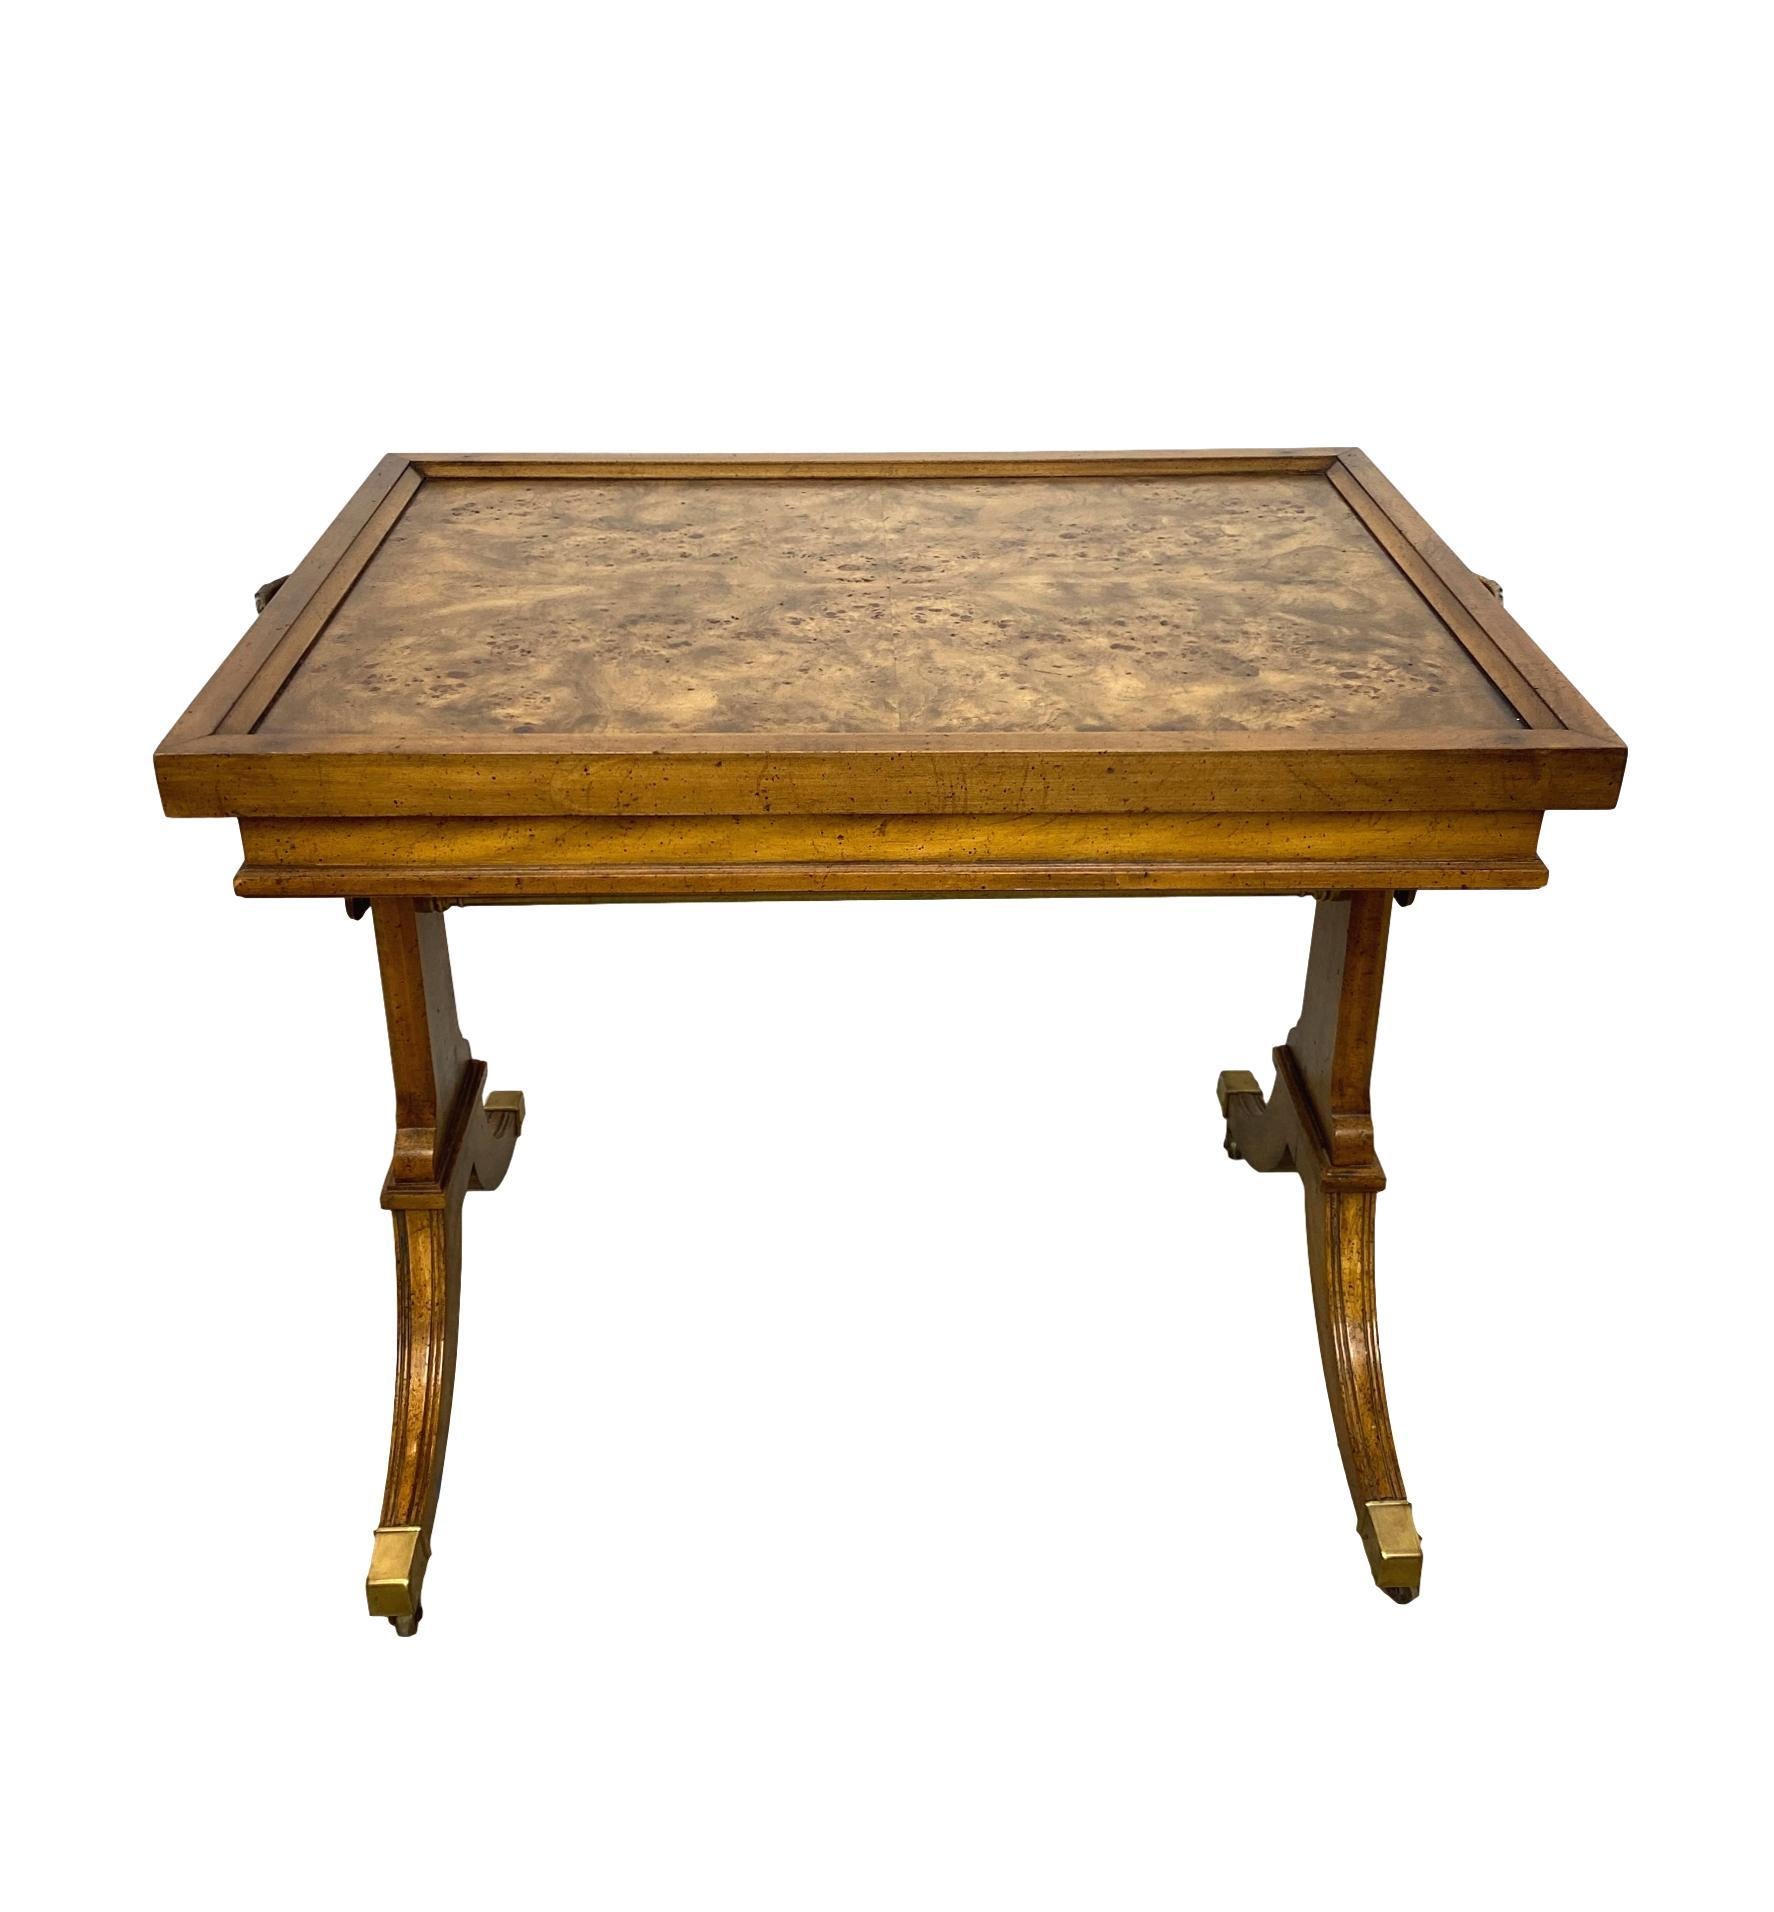 Regency style walnut convertible inlaid chess table/tea table with backgammon board interior, with highly figured walnut top, the reverse with a contrasting walnut inlaid chessboard, with a backgammon board underneath the removable top, with solid